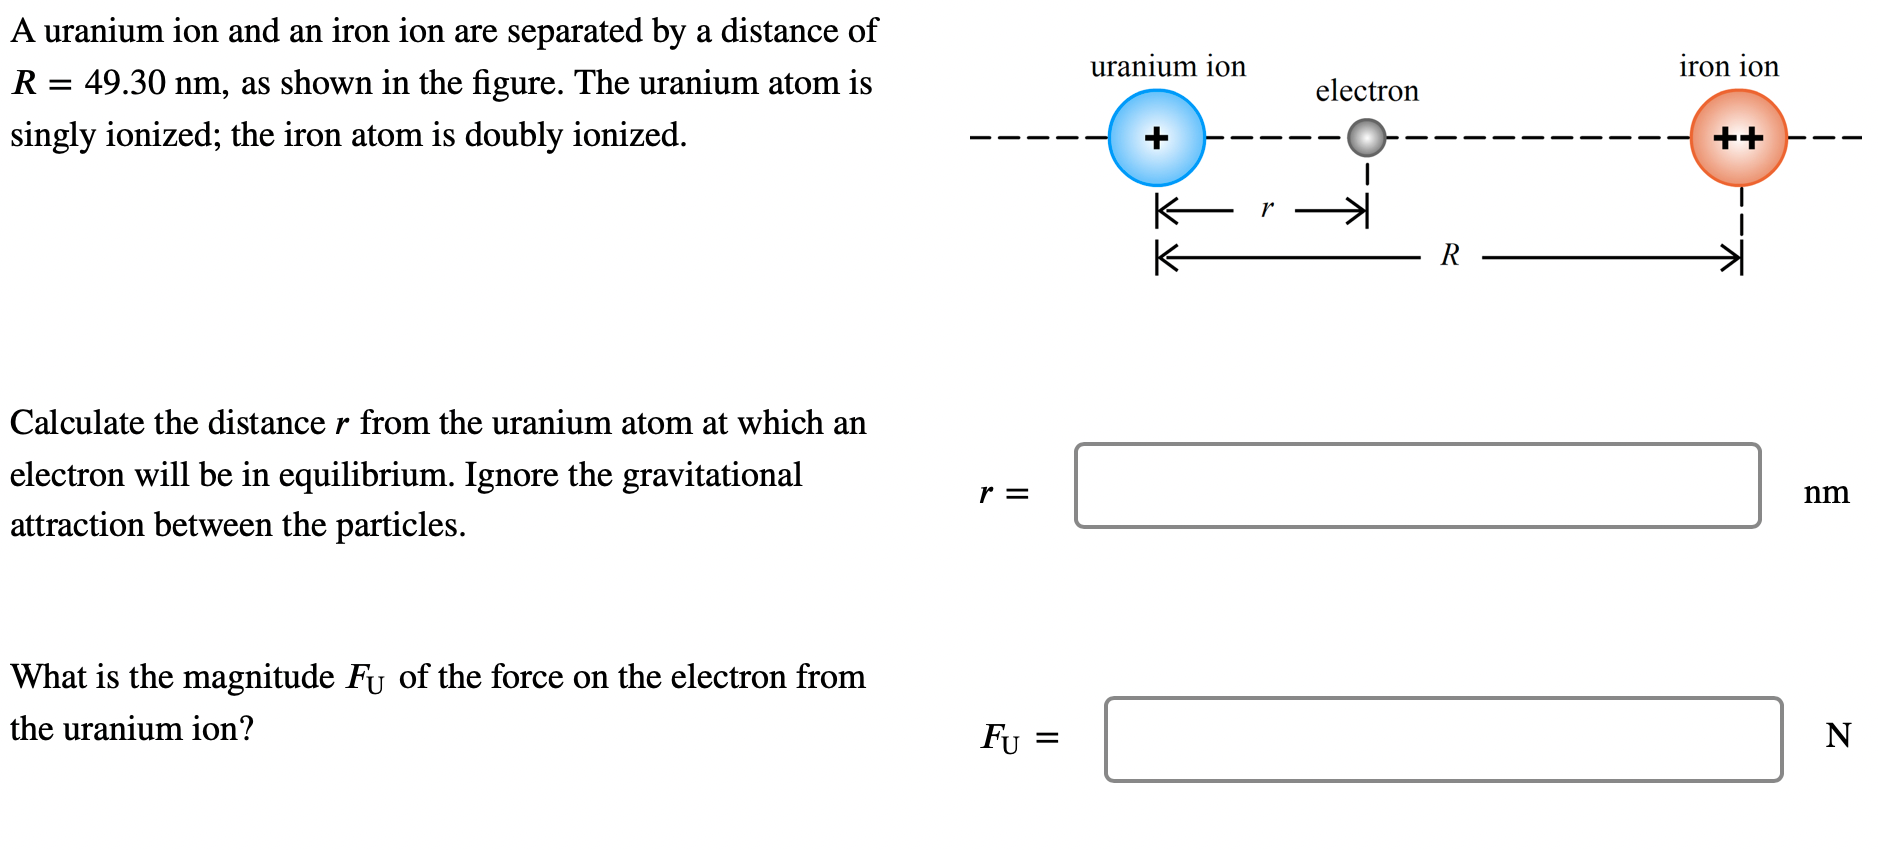 A uranium ion and an iron ion are separated by a distance of \( R=49.30 \mathrm{~nm} \), as shown in the figure. The uranium